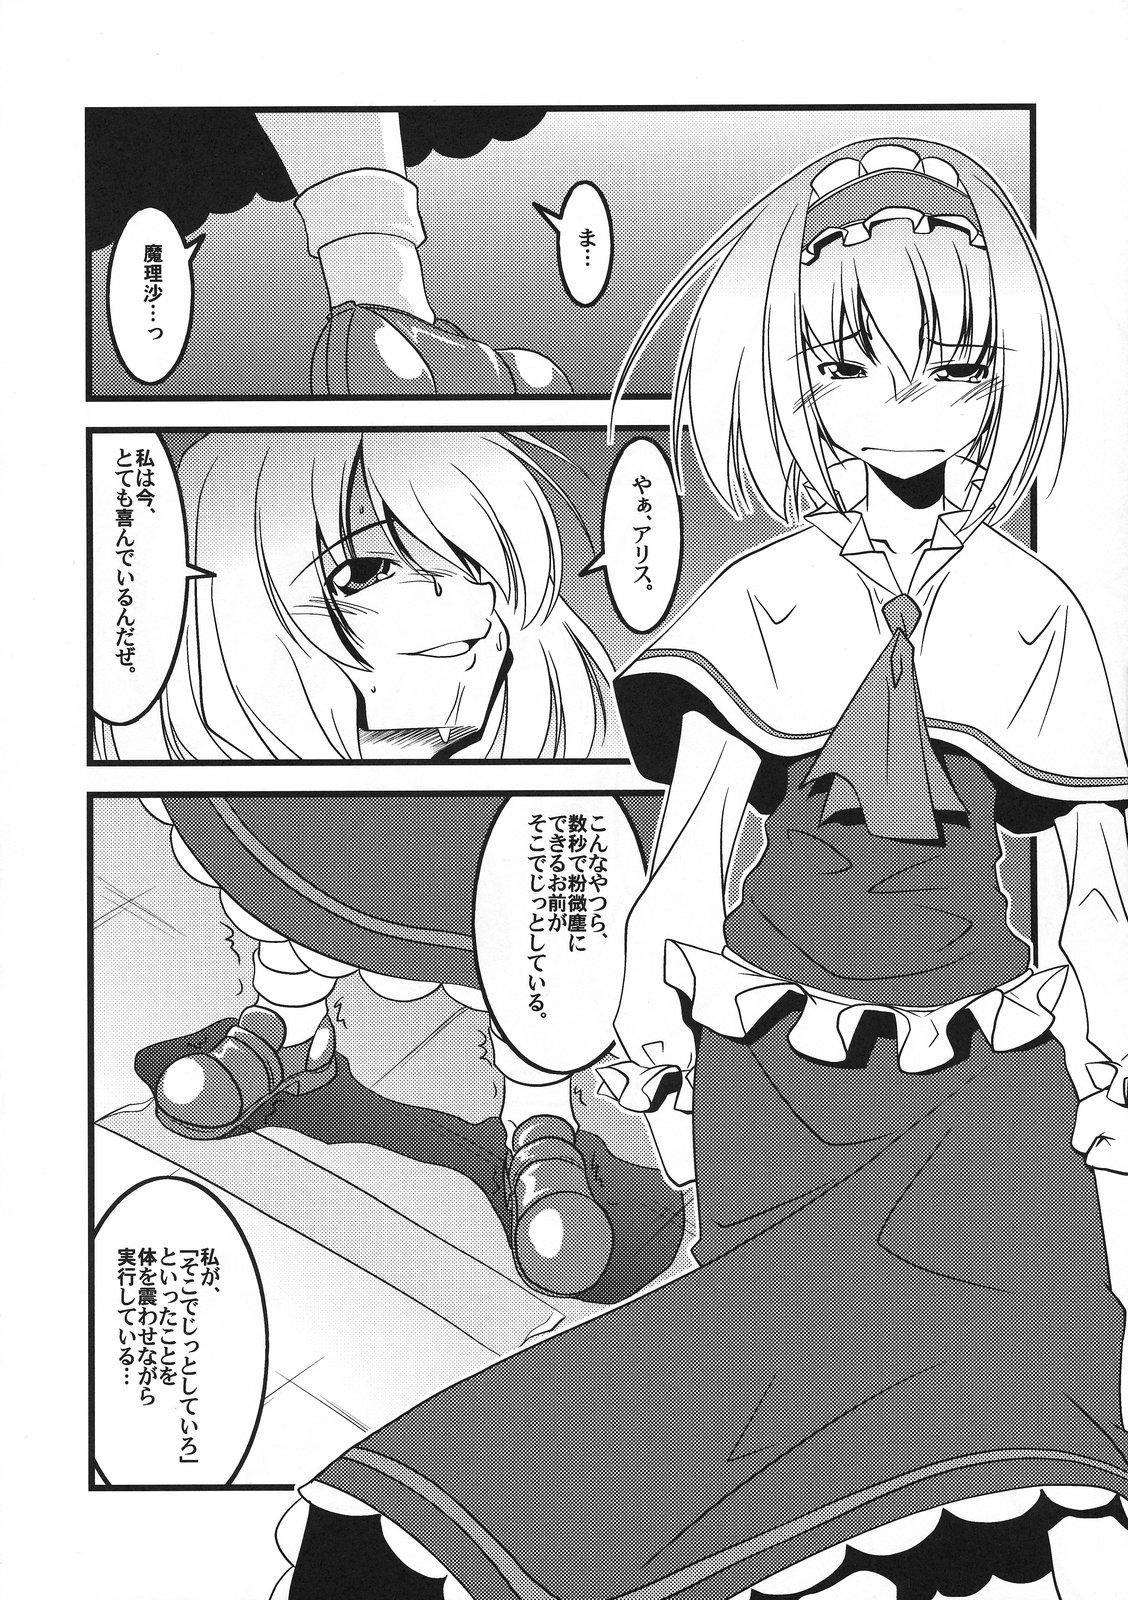 Best Blow Jobs Ever 恋虐／虐恋 - Touhou project Gaygroupsex - Page 6